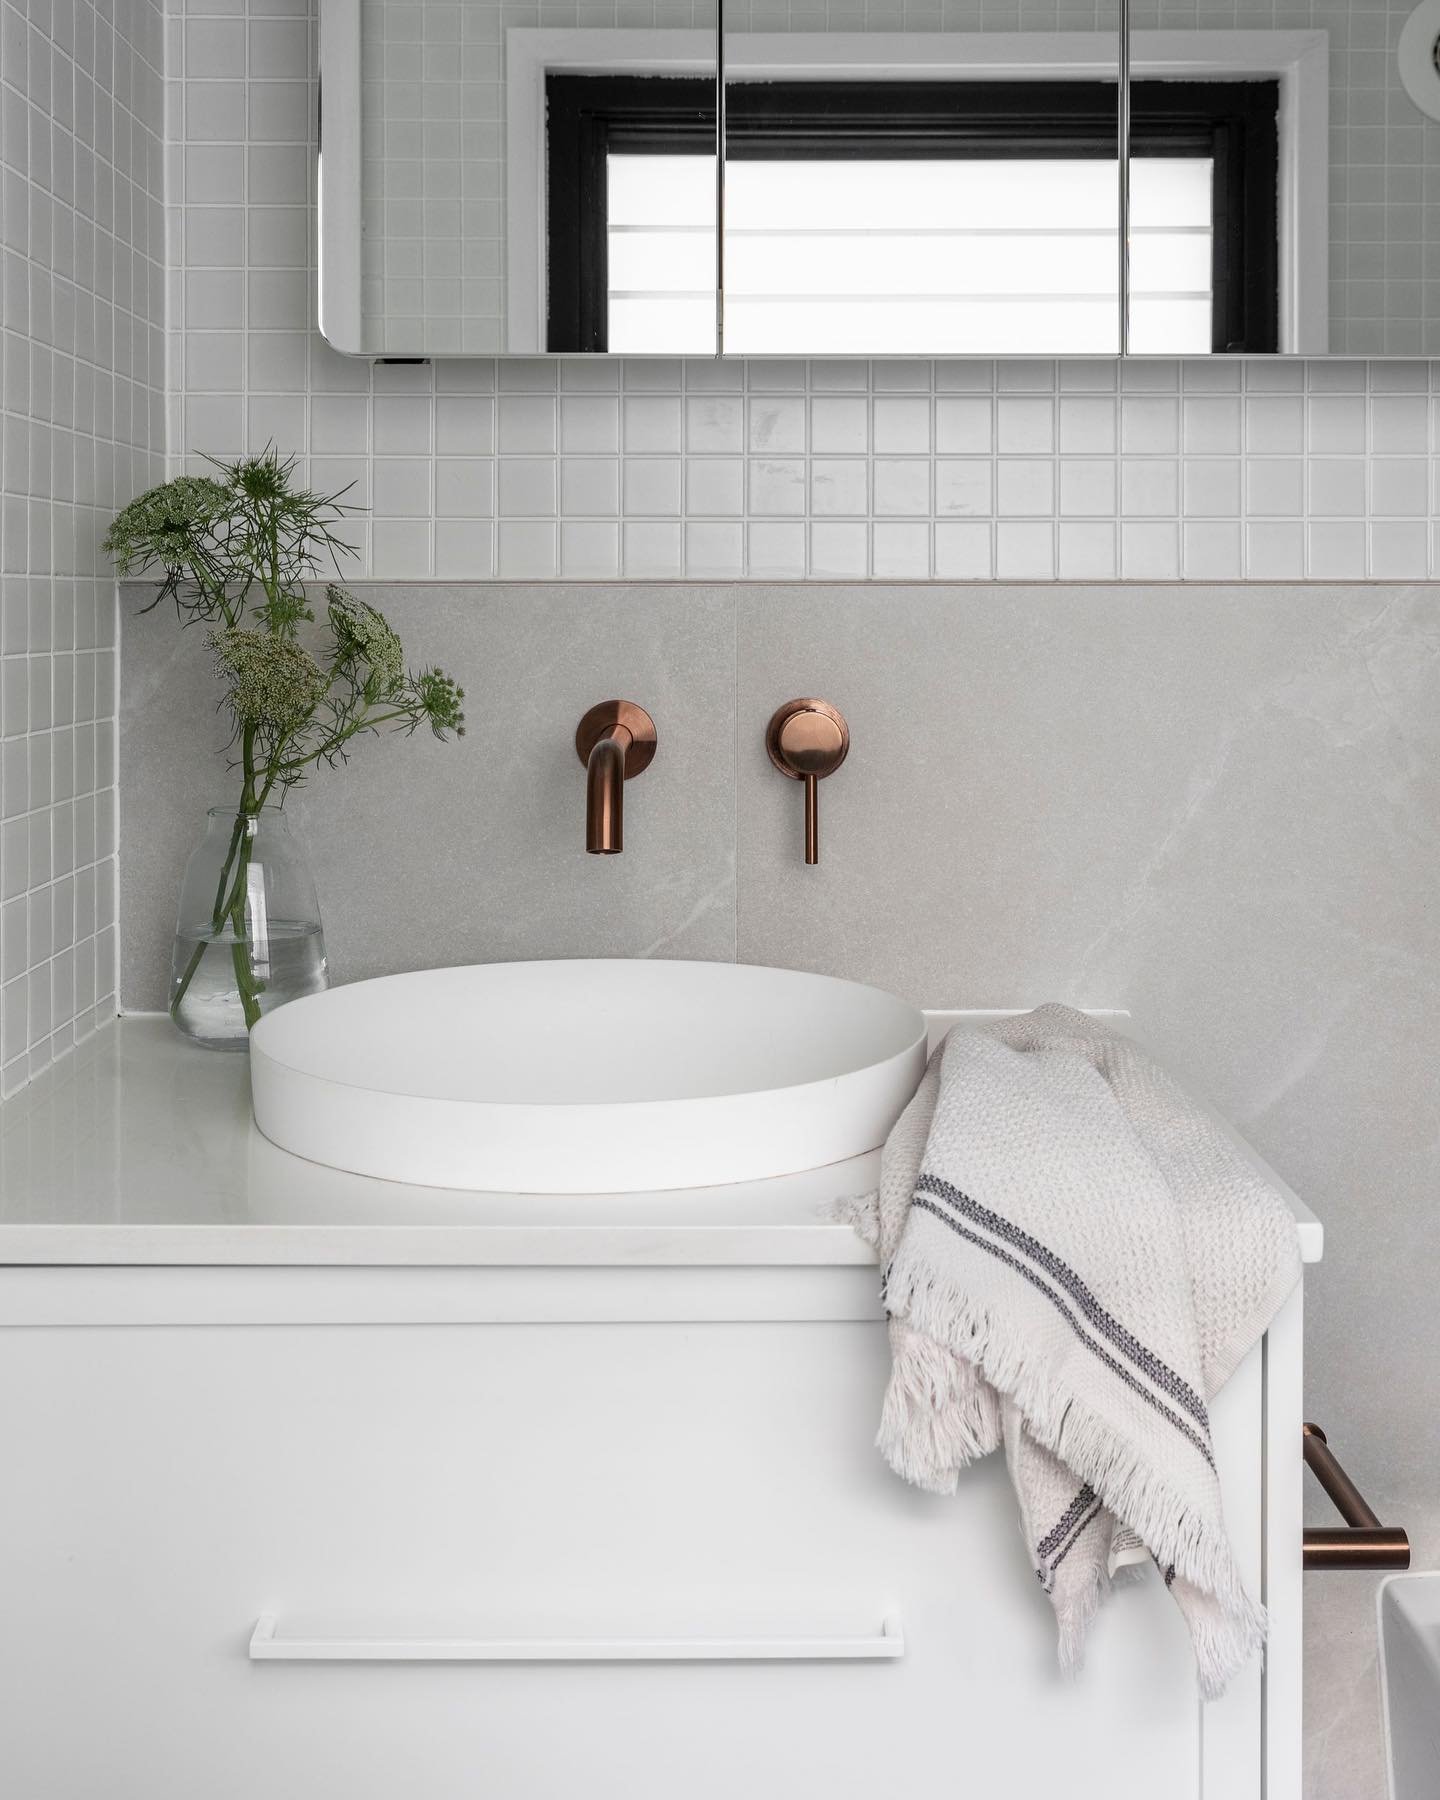 🛀 bathroom details ✨ 

A white on white bathroom could present as cold and clinical. The selection of matte surfaces (tiles, matte sink) softly diffuses light around the room and the copper fixtures bring out the warmer tones in the accent stone til